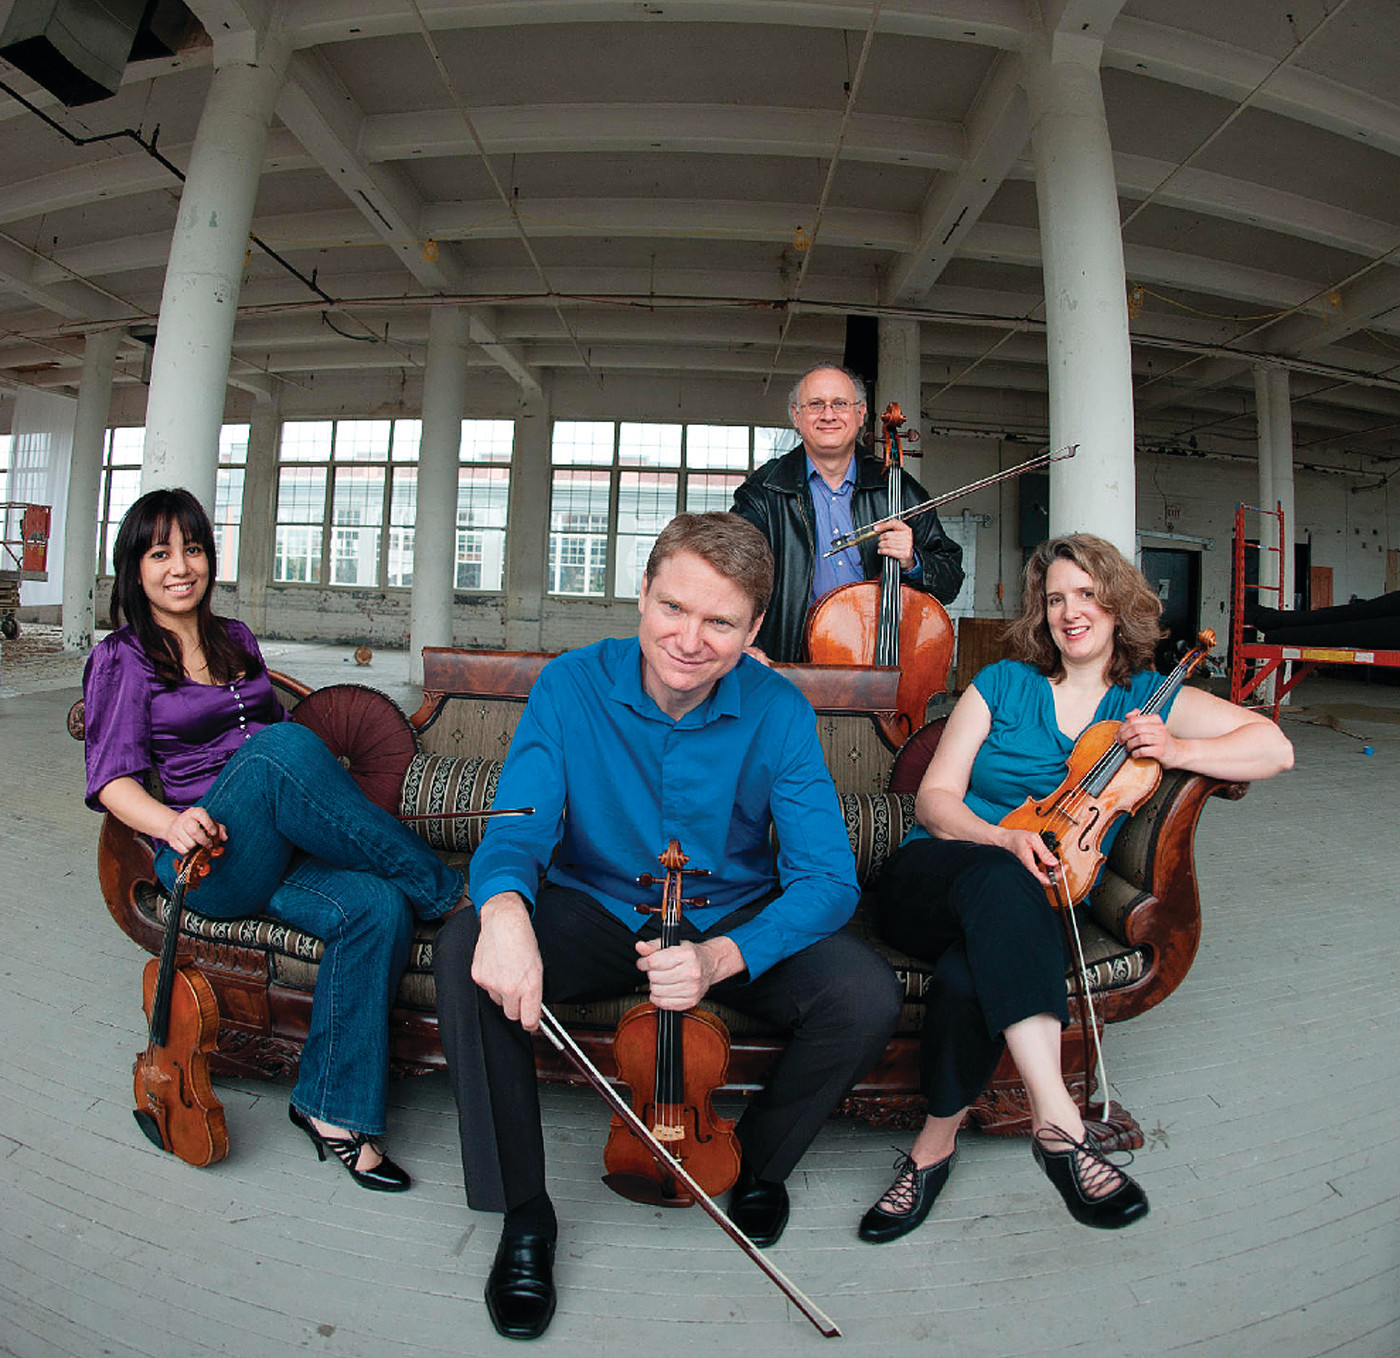 PERFORMING IN WARWICK: The Hartt String Quartet will be featured in the History in Music Series at Clouds Hill in Cowesett Saturday, April 2 at 5:30 p.m.